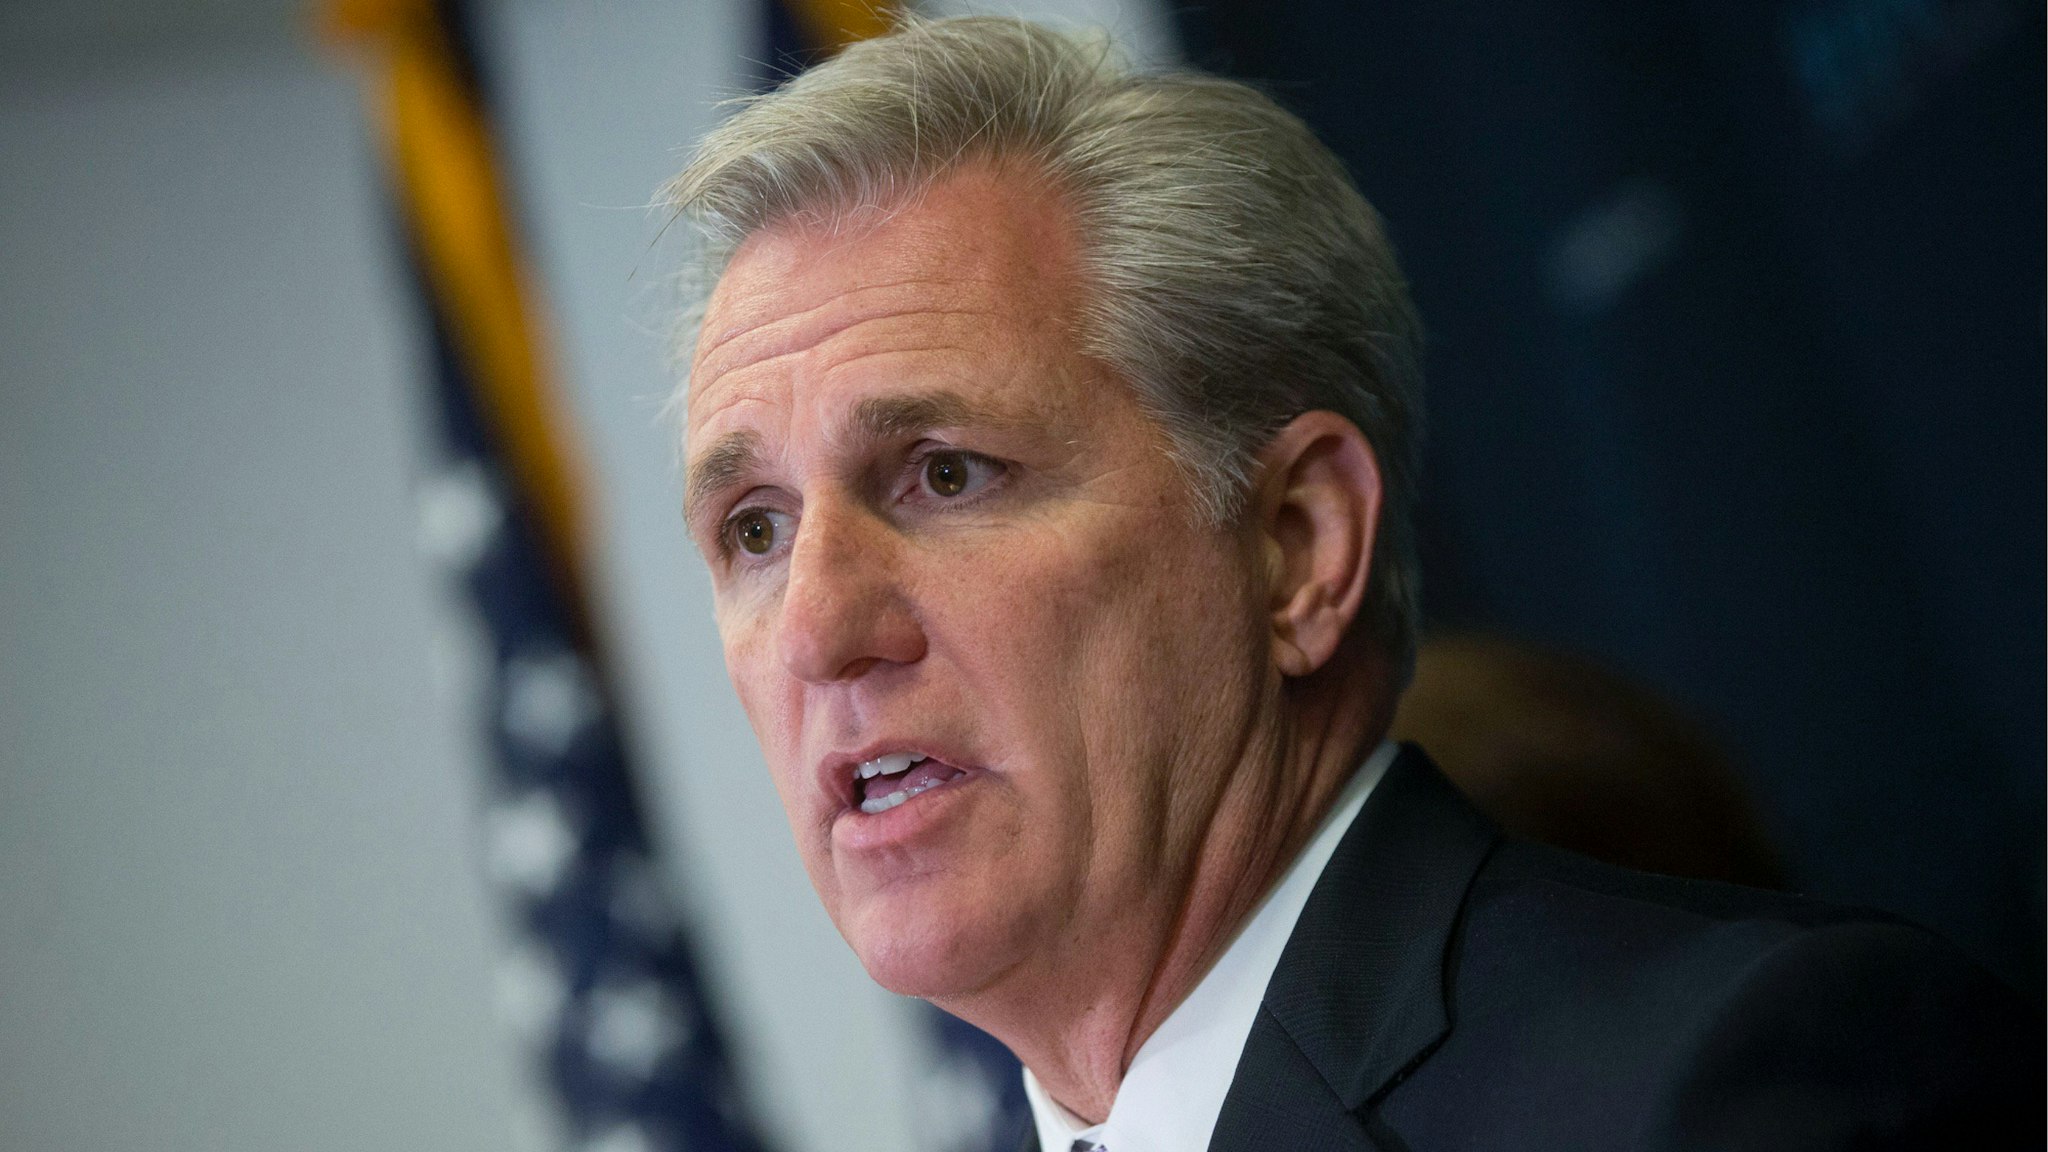 House Majority Leader Kevin McCarthy, a Republican from California, speaks during a news conference after a House Republican meeting at the U.S. Capitol in Washington, D.C., U.S., on Wednesday, Oct. 21, 2015.